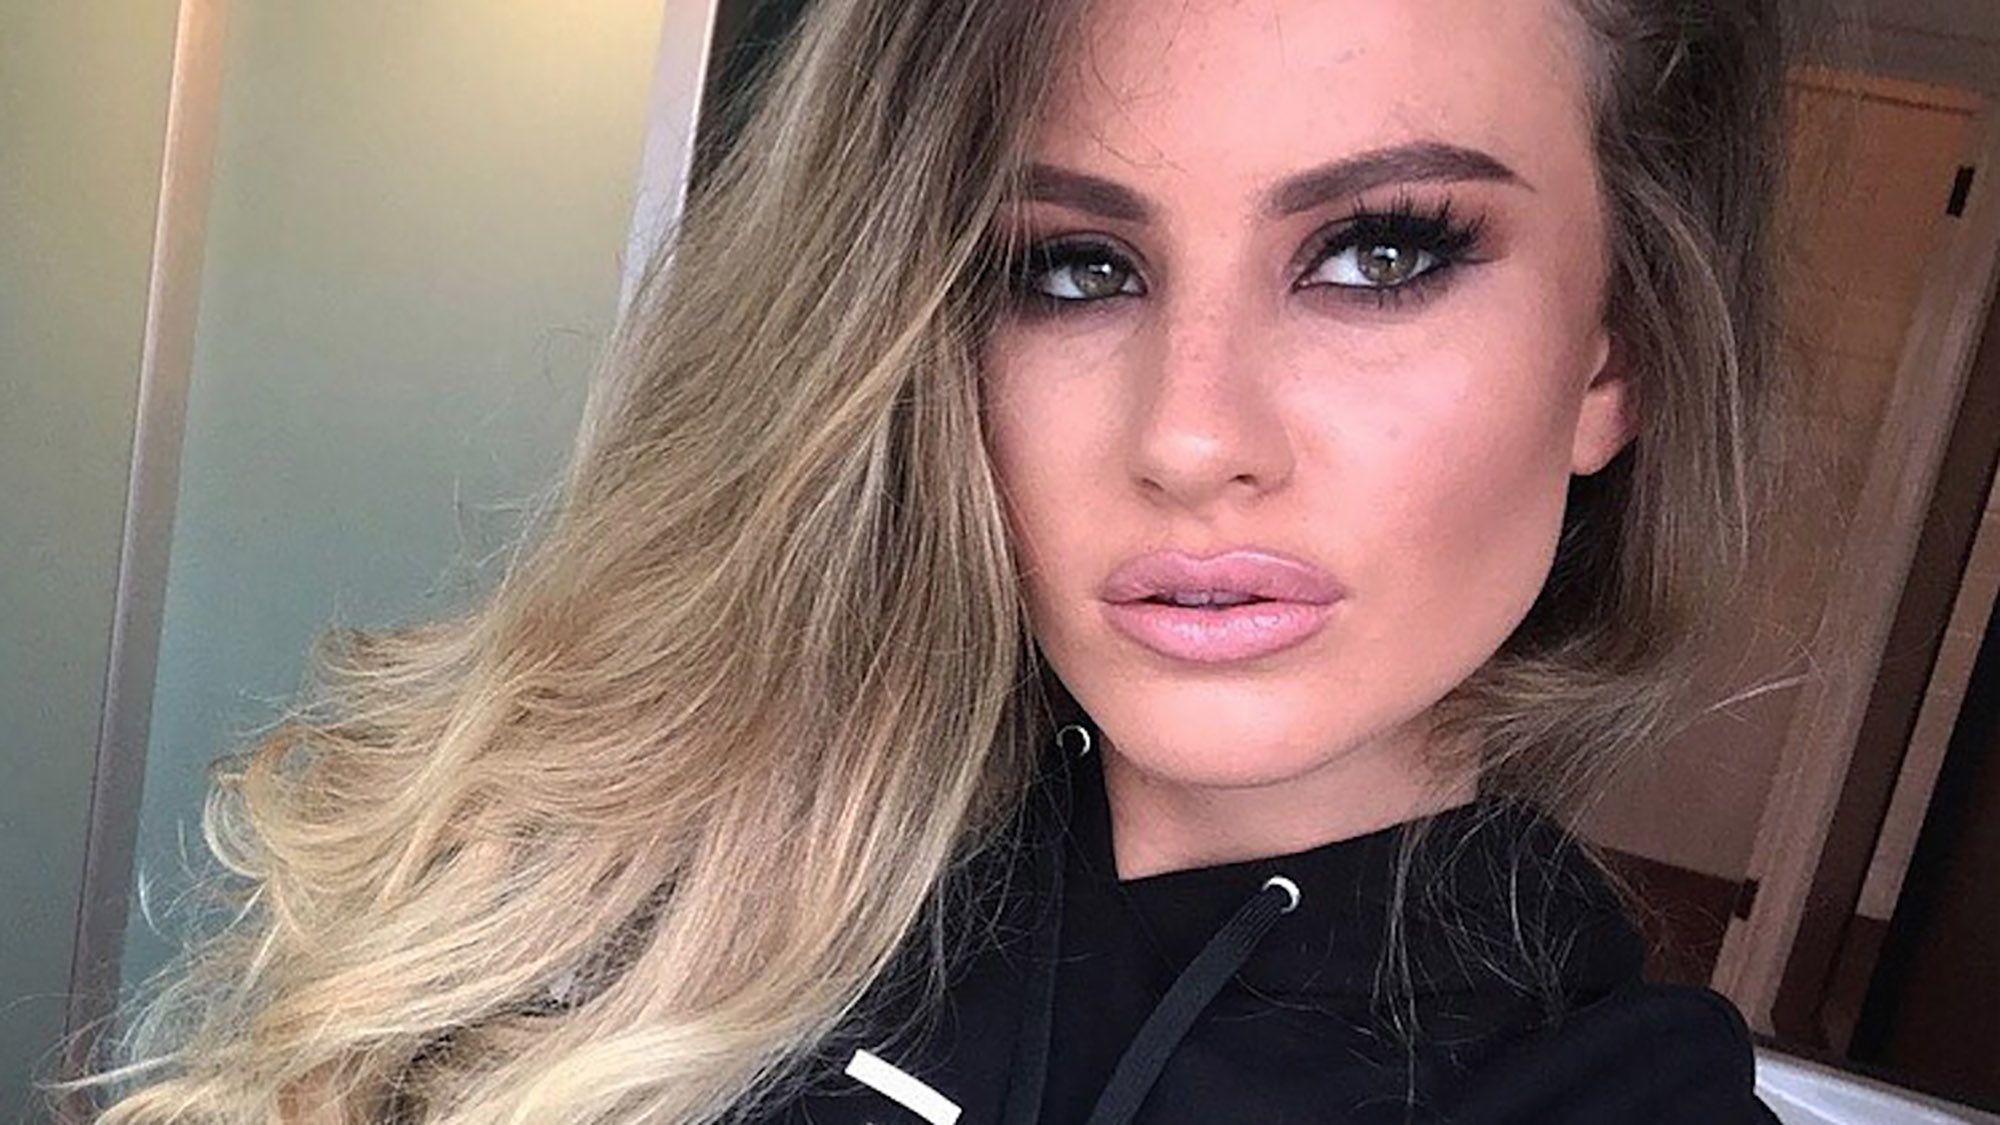 Chloe Ayling not an 'accomplice' in kidnapping, lawyer says | CNN